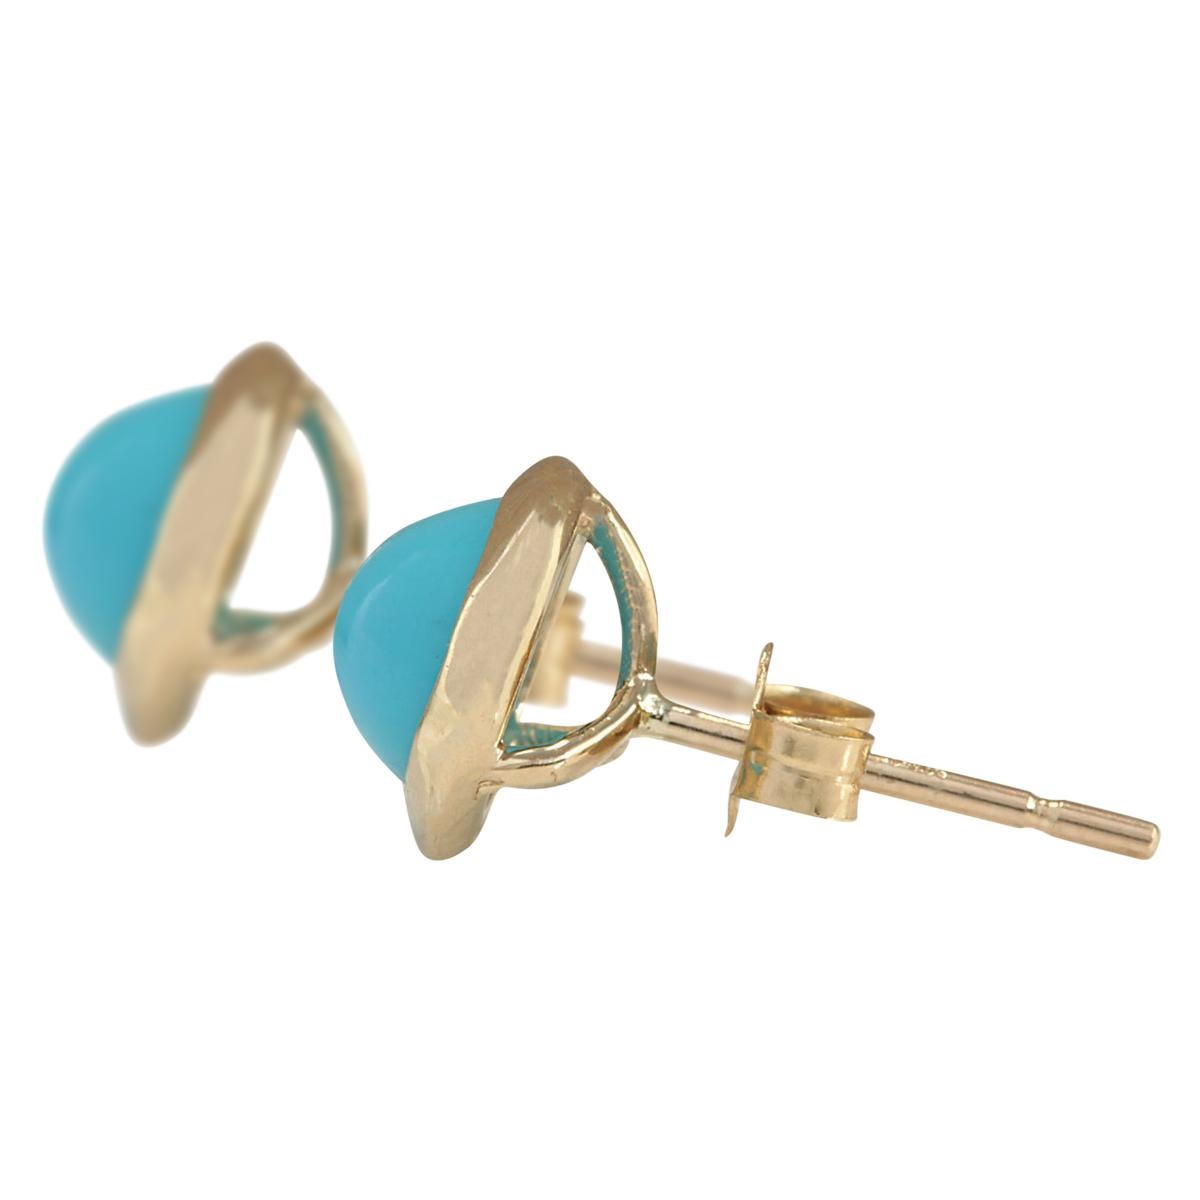 Stamped: 14K Yellow Gold
Total Earrings Weight: 1.8 Grams
Total Natural Turquoise Weight is 3.00 Carat (Measures: 7.00x7.00 mm)
Color: Blue
Face Measures: 8.90x8.90 mm
Sku: [703325W]